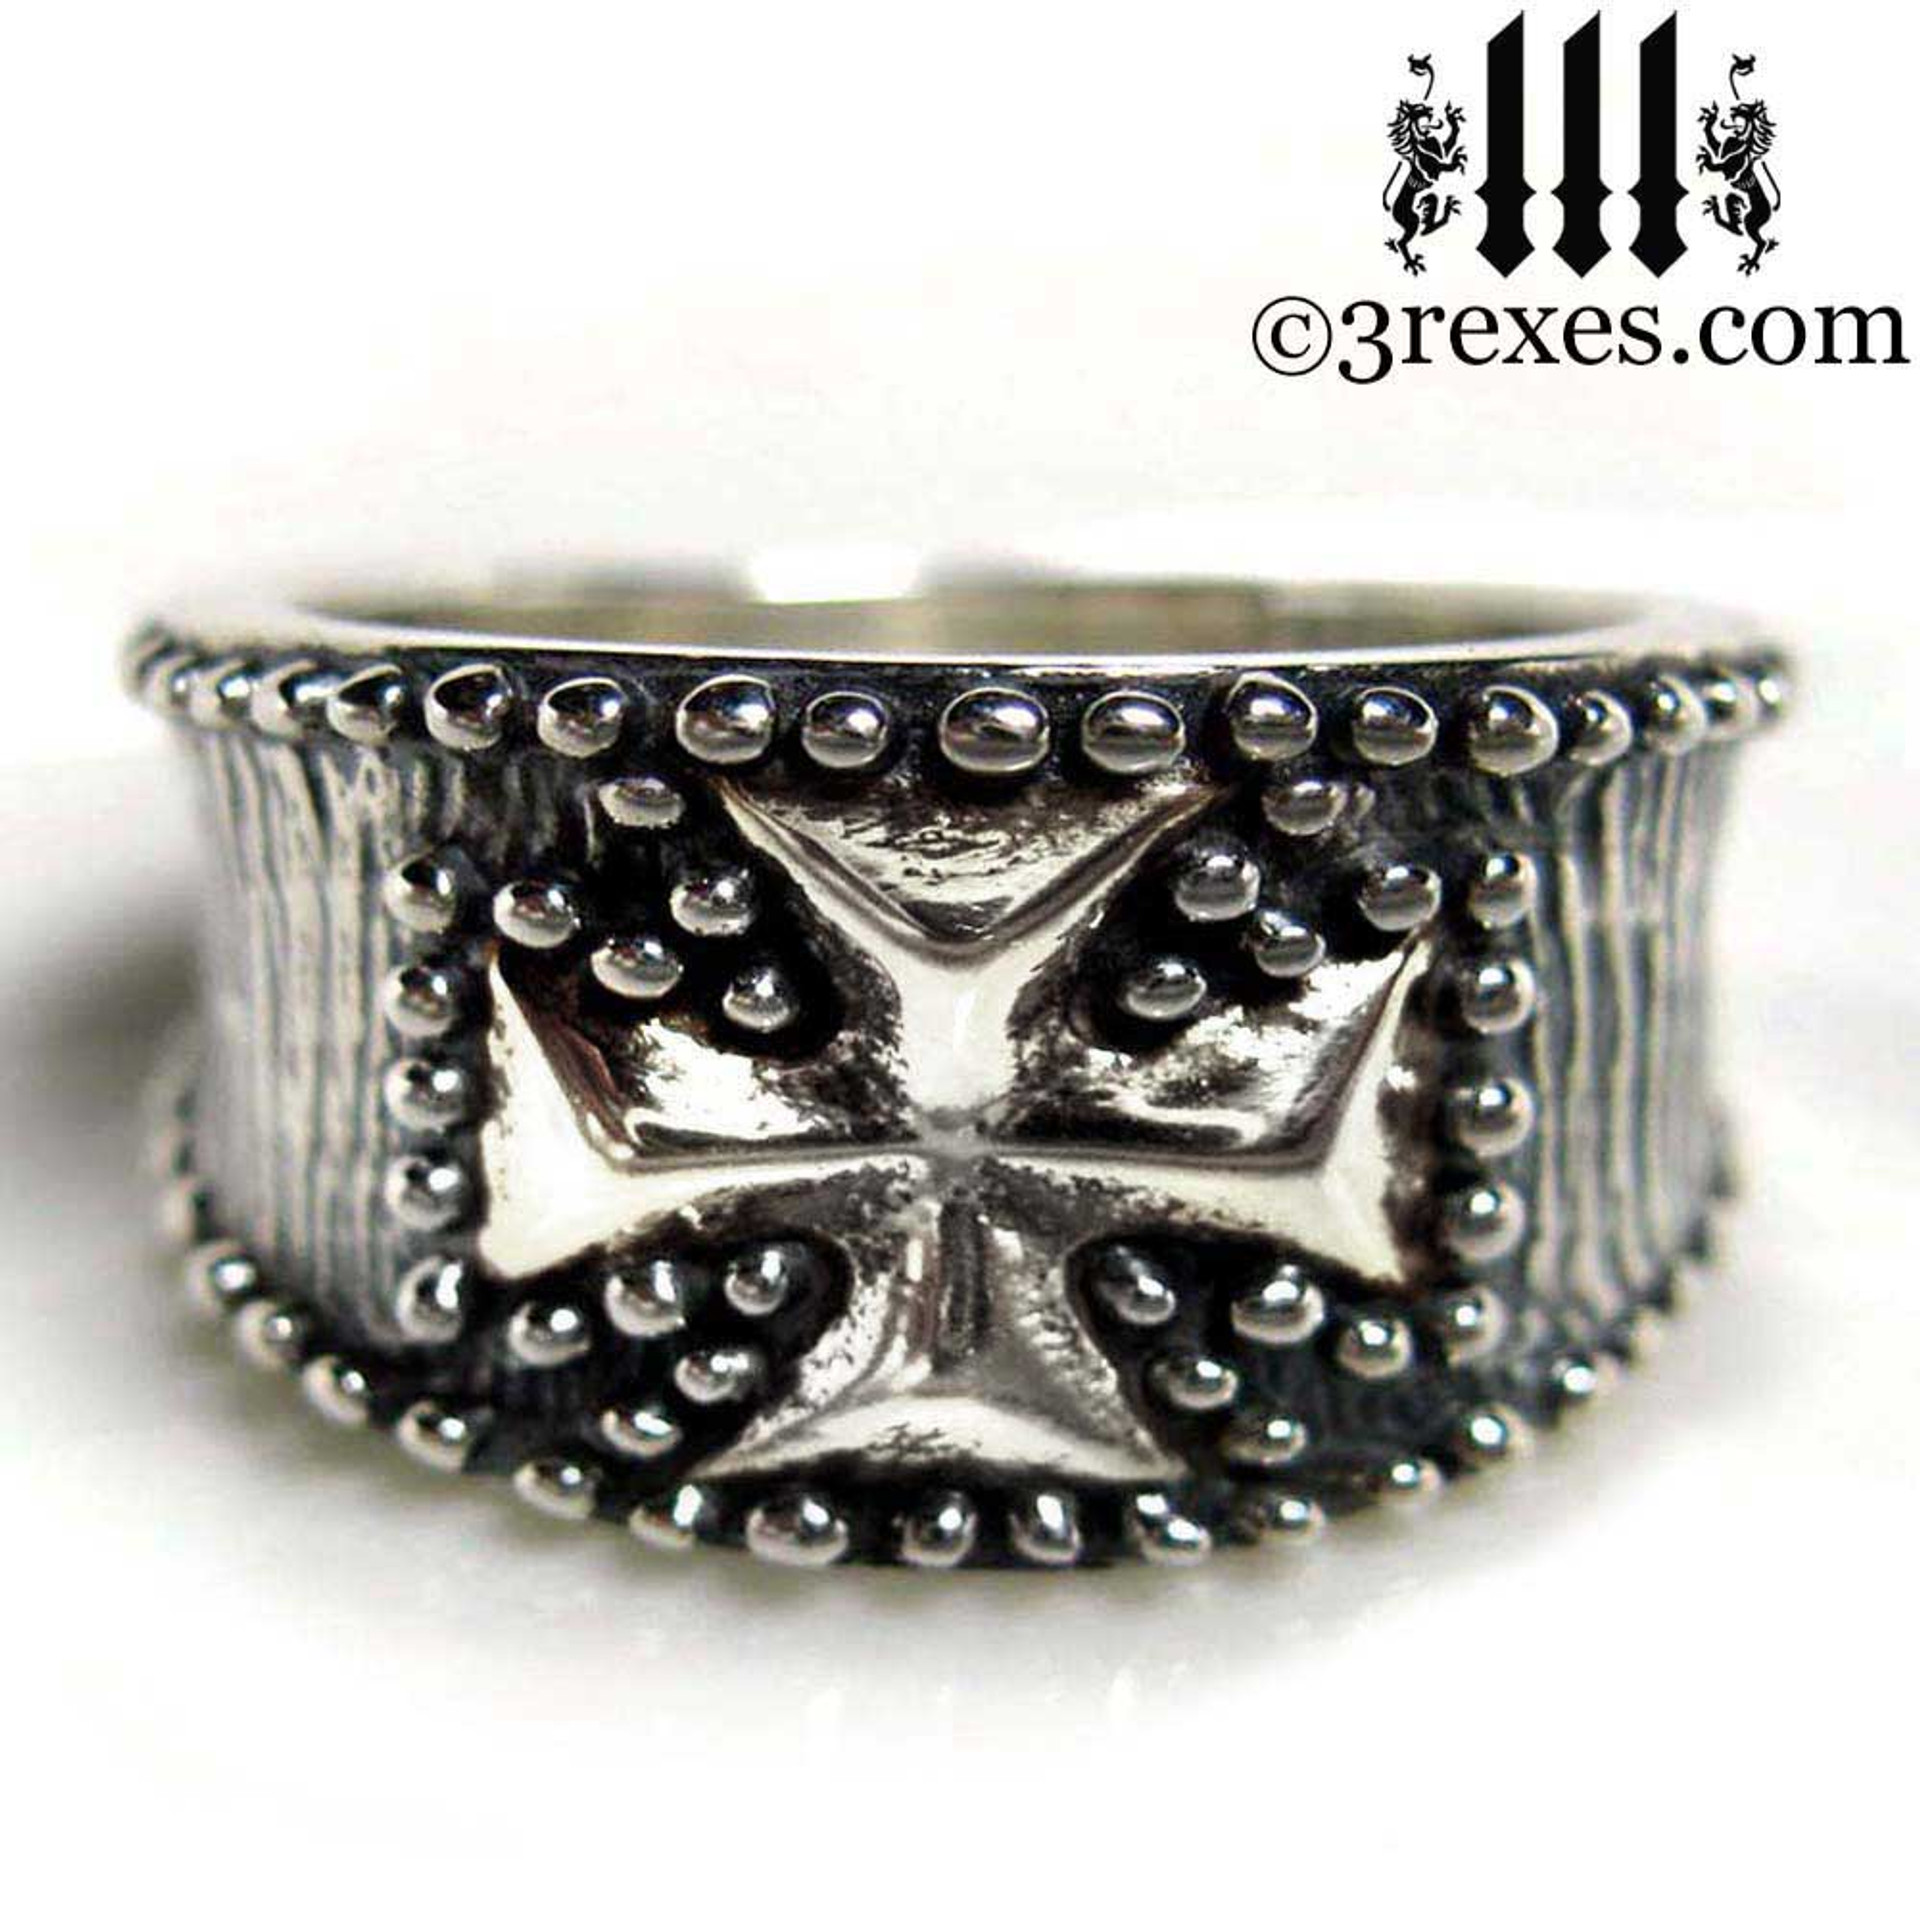 Unique Mens Rings Silver Biker Bands Gothic Rings for